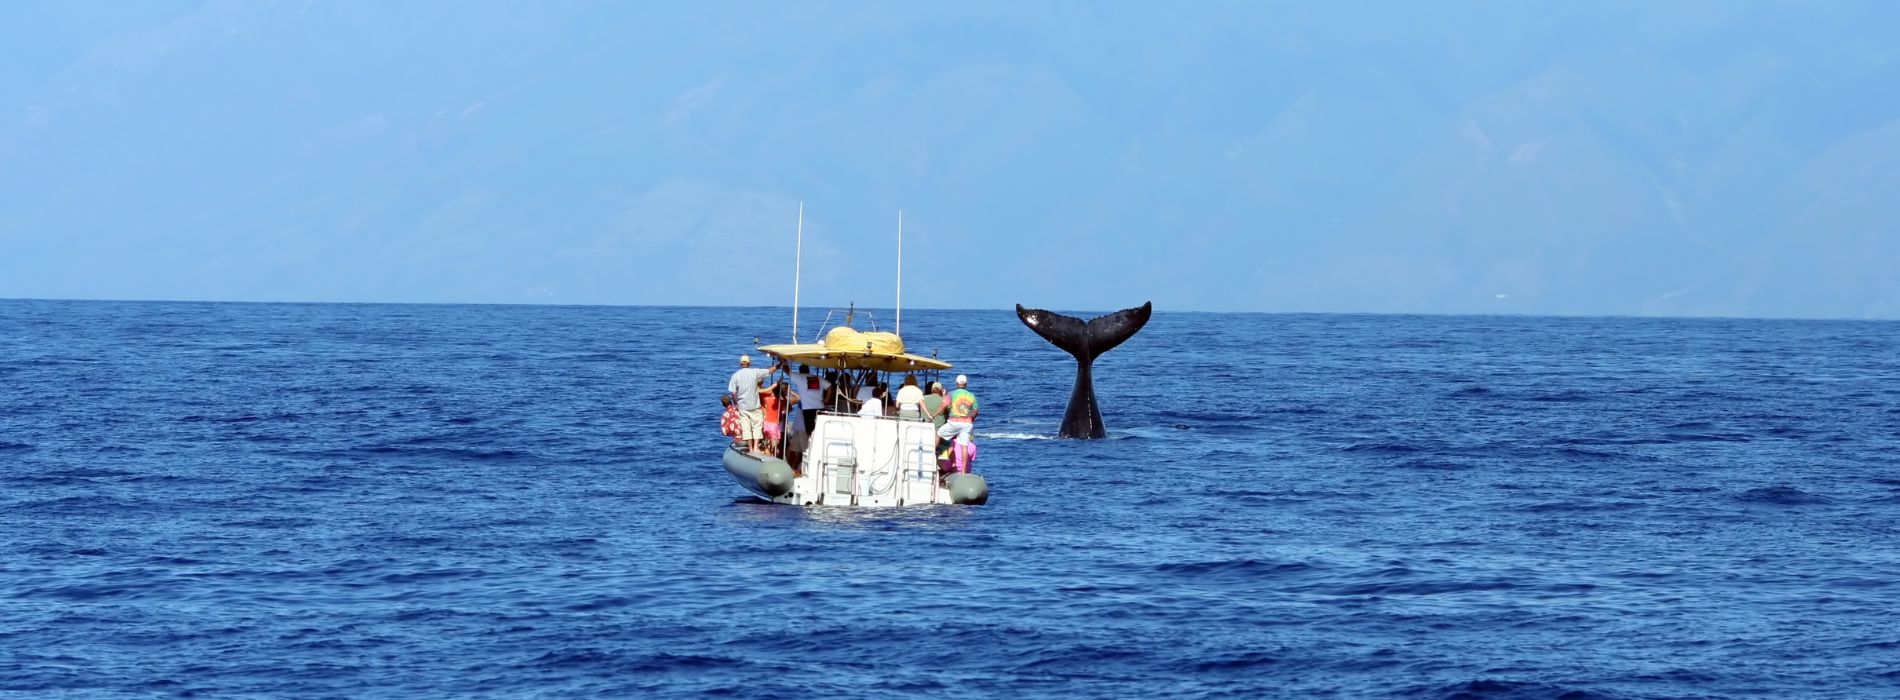 Best Whale Watching Tours in Cabo San Lucas - Madeinsea©